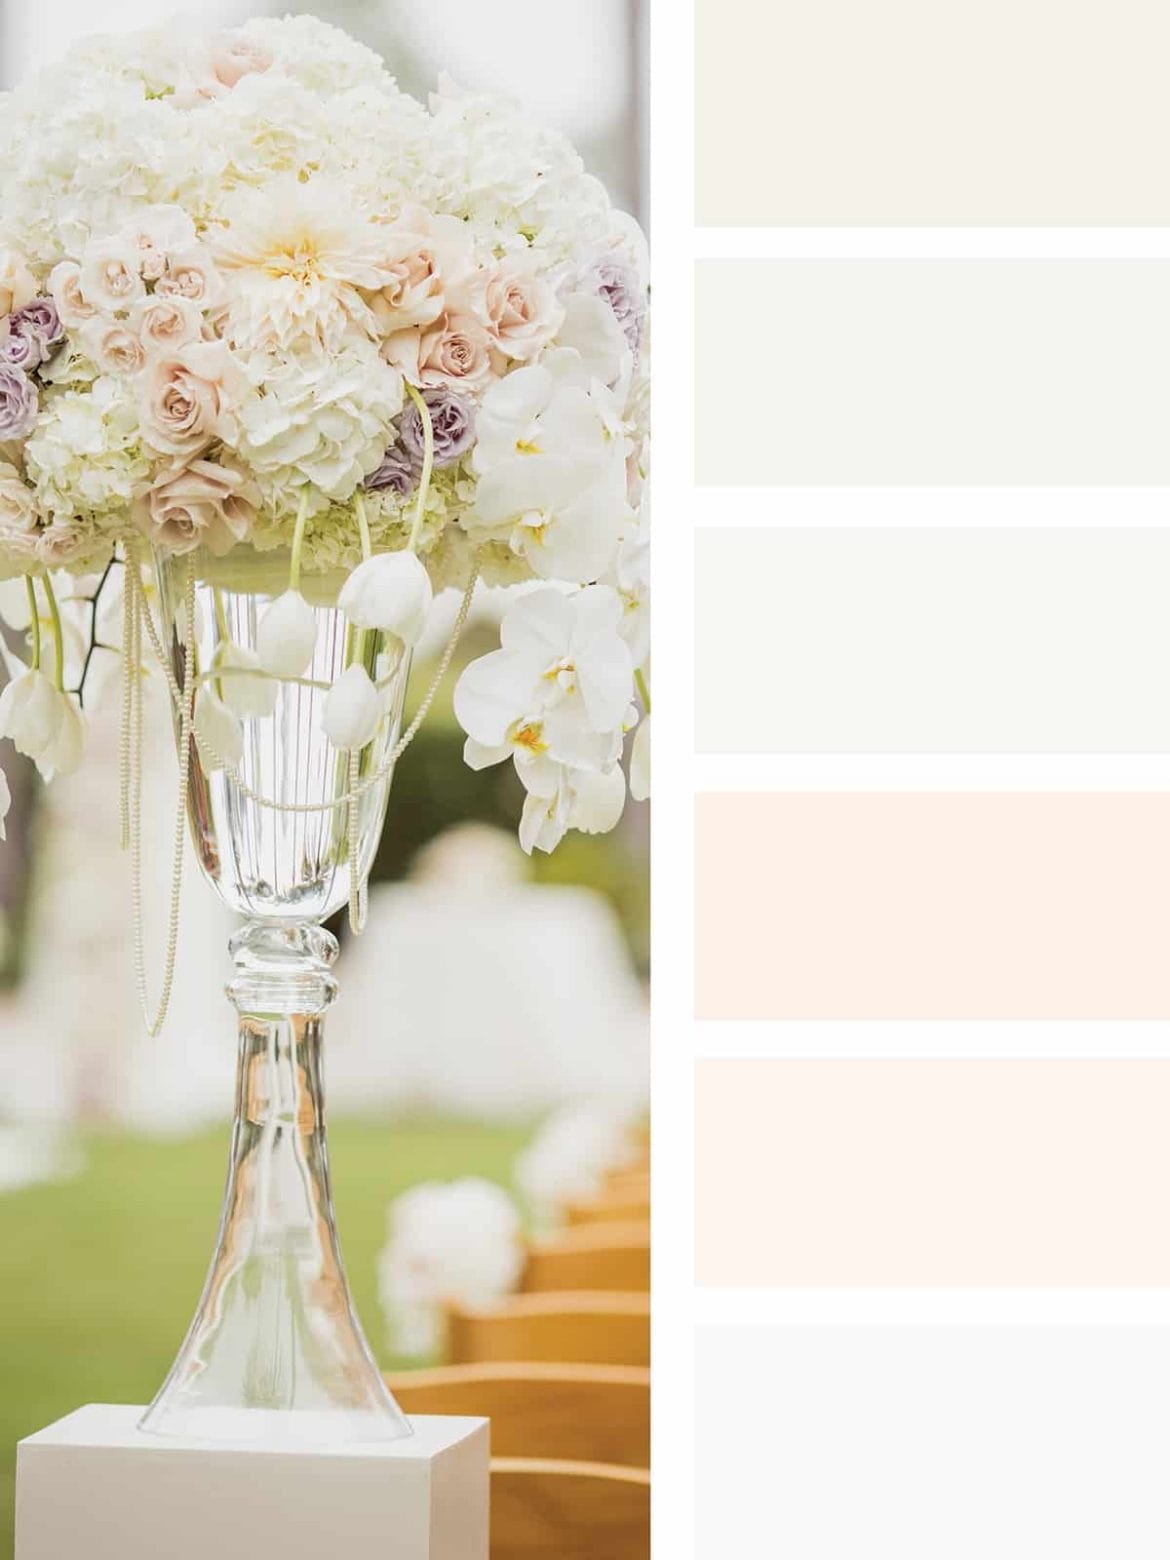 A wedding color palette featuring white and pink flowers in a vase, perfect for couples looking for tuxedo or suit rentals.